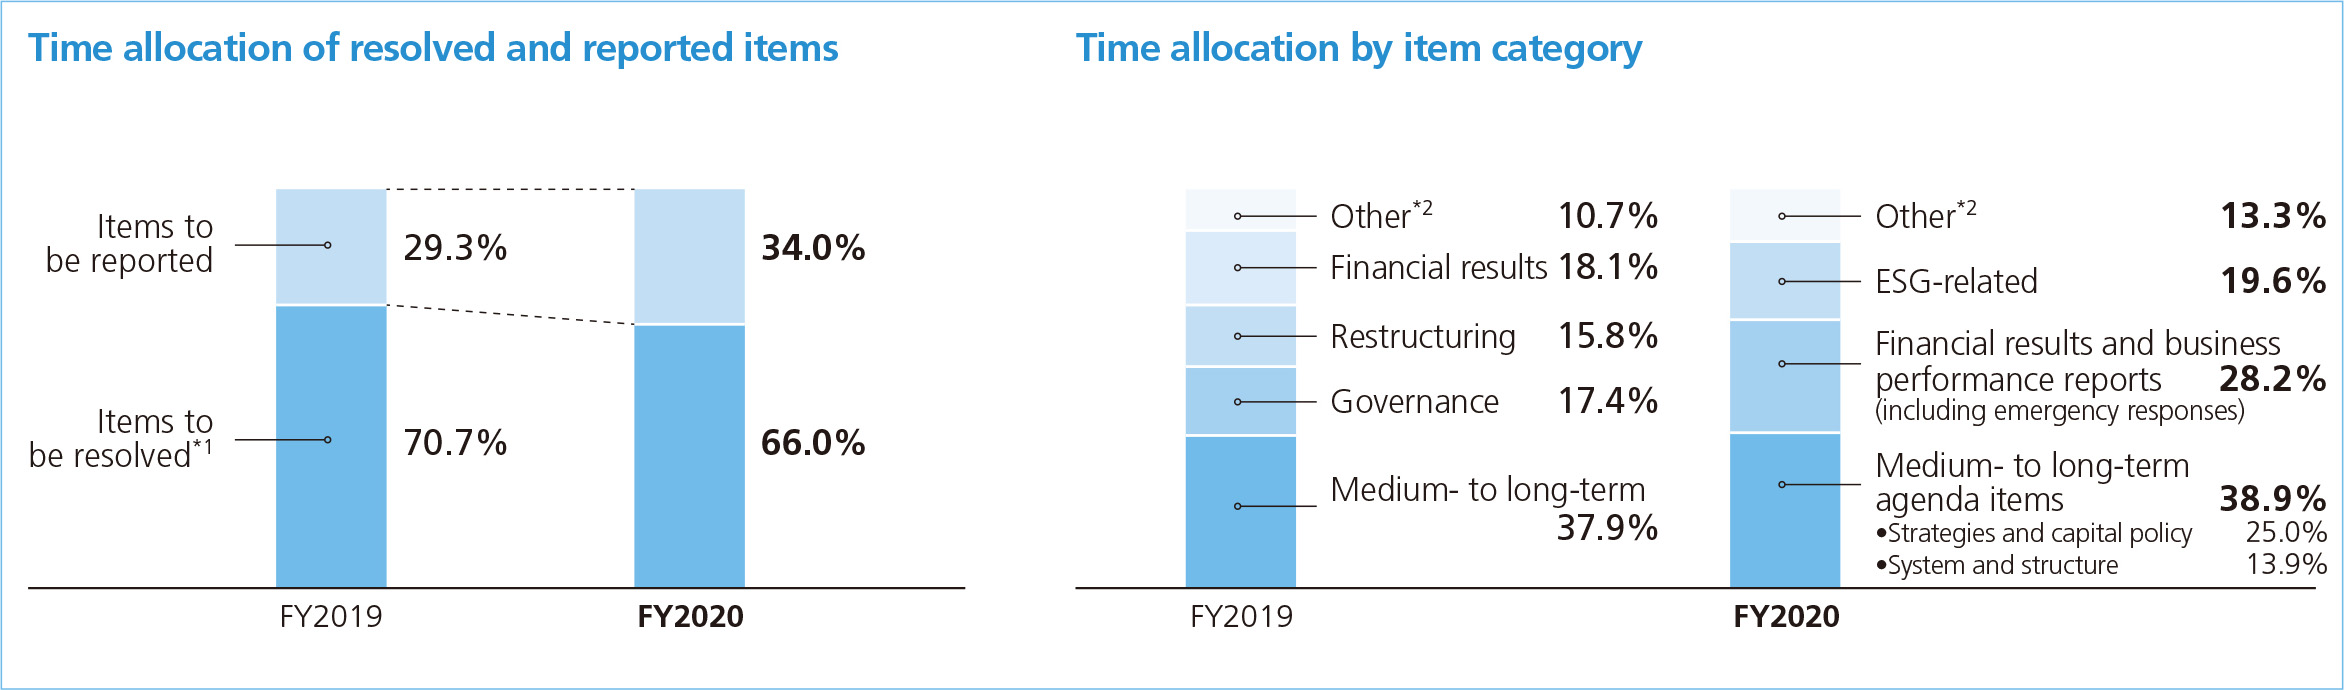 Board of Directors—Time allocation by agenda item